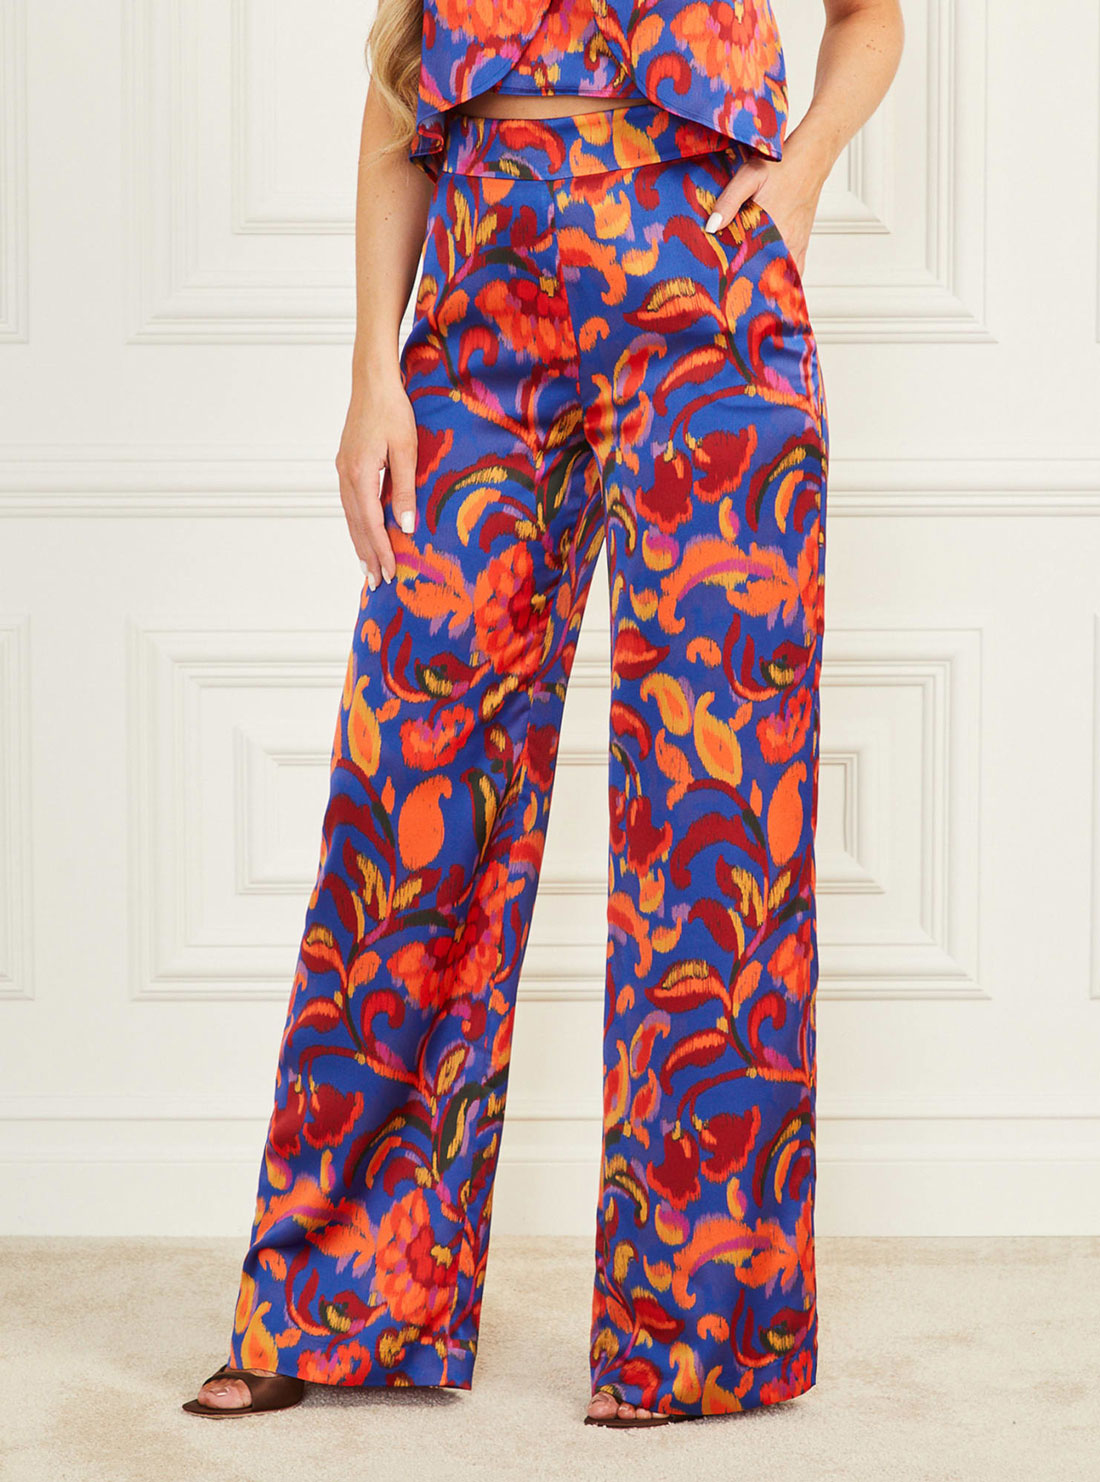 Marciano Betty Blue Printed Pants